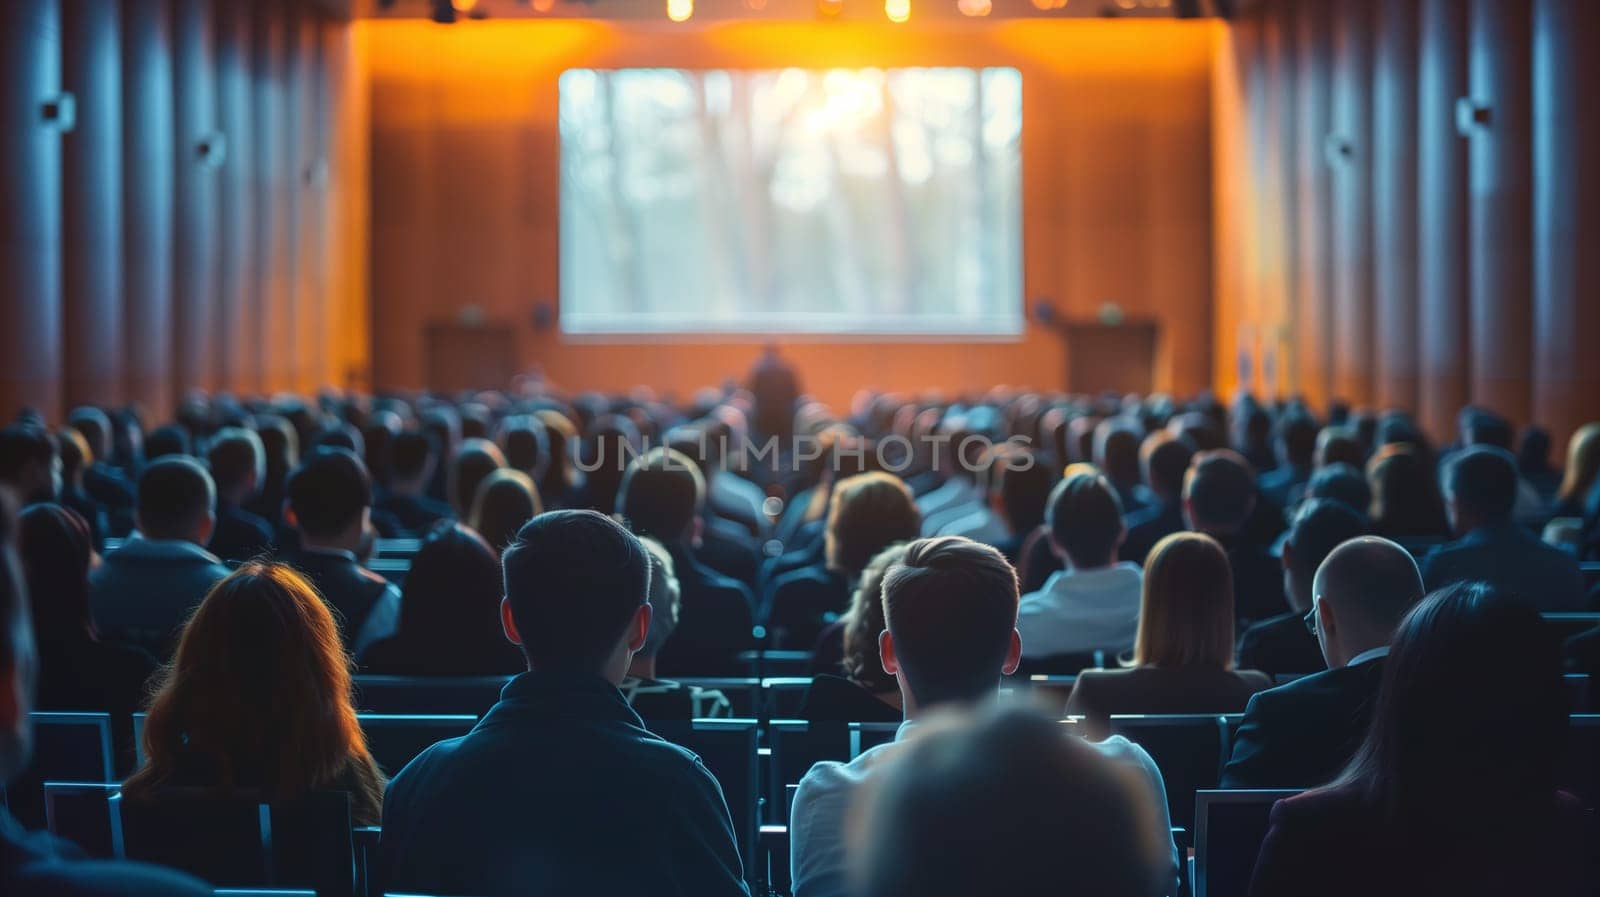 A group of people is gathered in a room, sitting in chairs facing a large projection screen. They appear focused on the screen, possibly attending a business presentation or seminar.